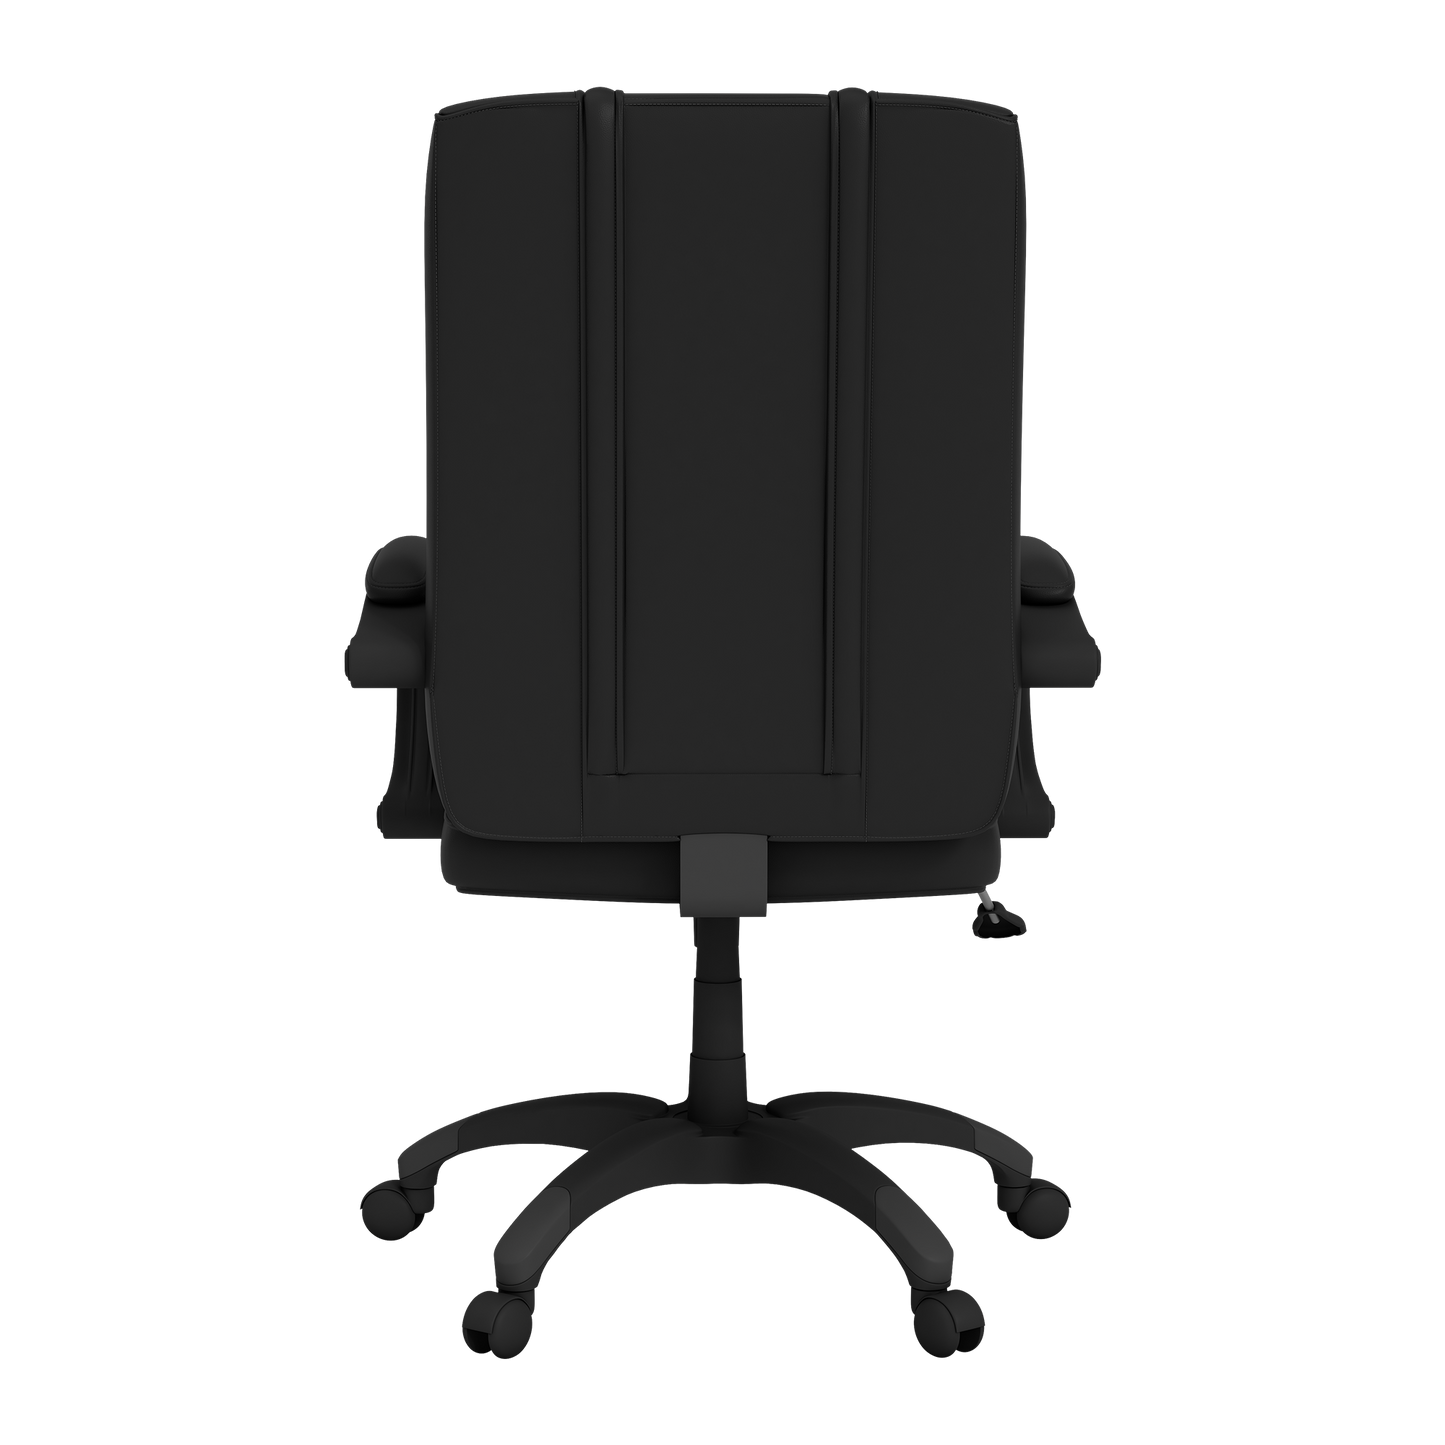 Office Chair 1000 with Houston Astros Secondary